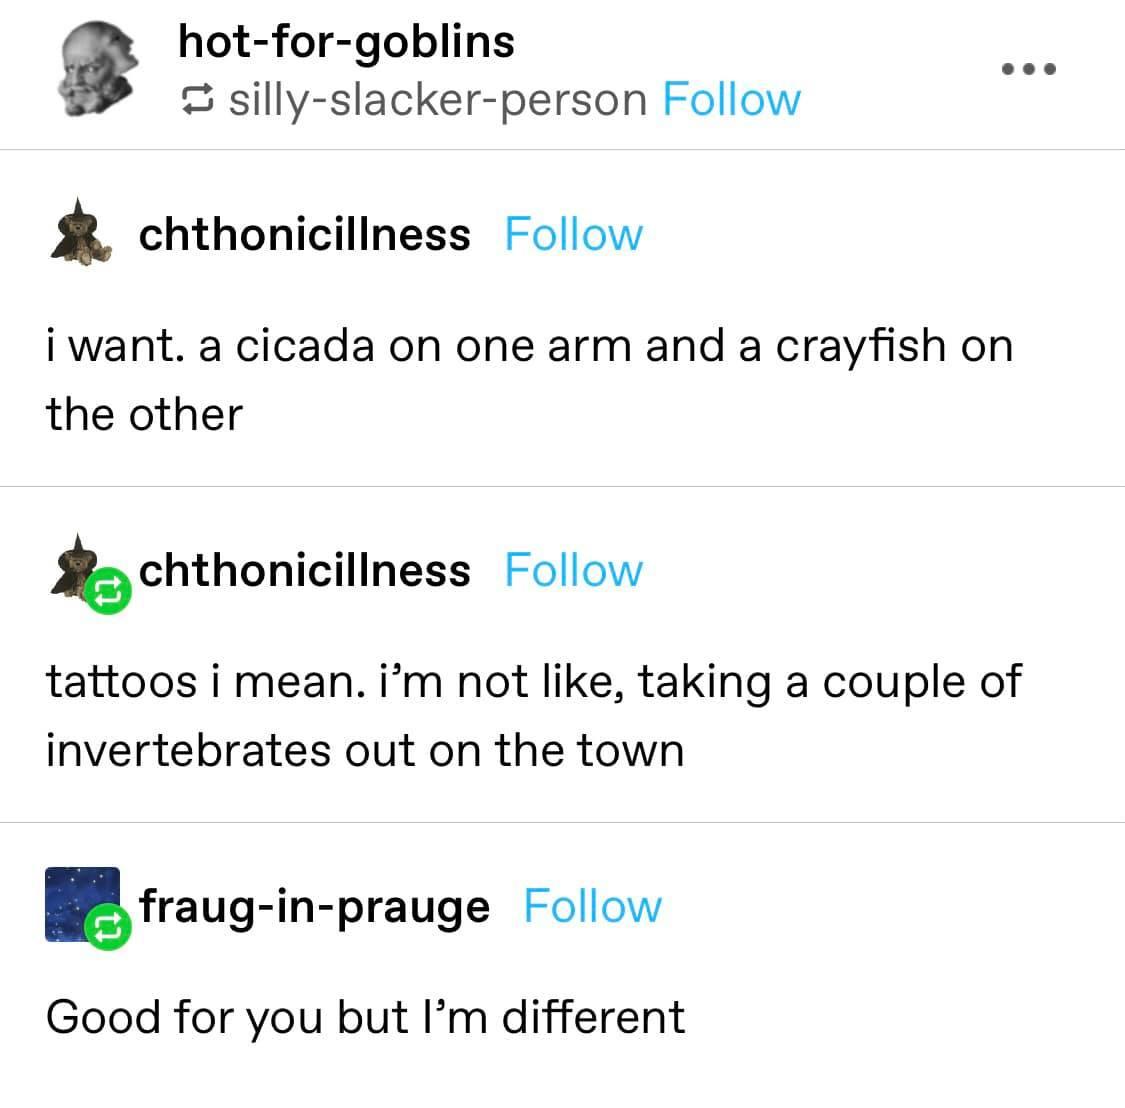 document - hotforgoblins sillyslackerperson ... chthonicillness i want. a cicada on one arm and a crayfish on the other chthonicillness tattoos i mean. i'm not , taking a couple of invertebrates out on the town frauginprauge Good for you but I'm different